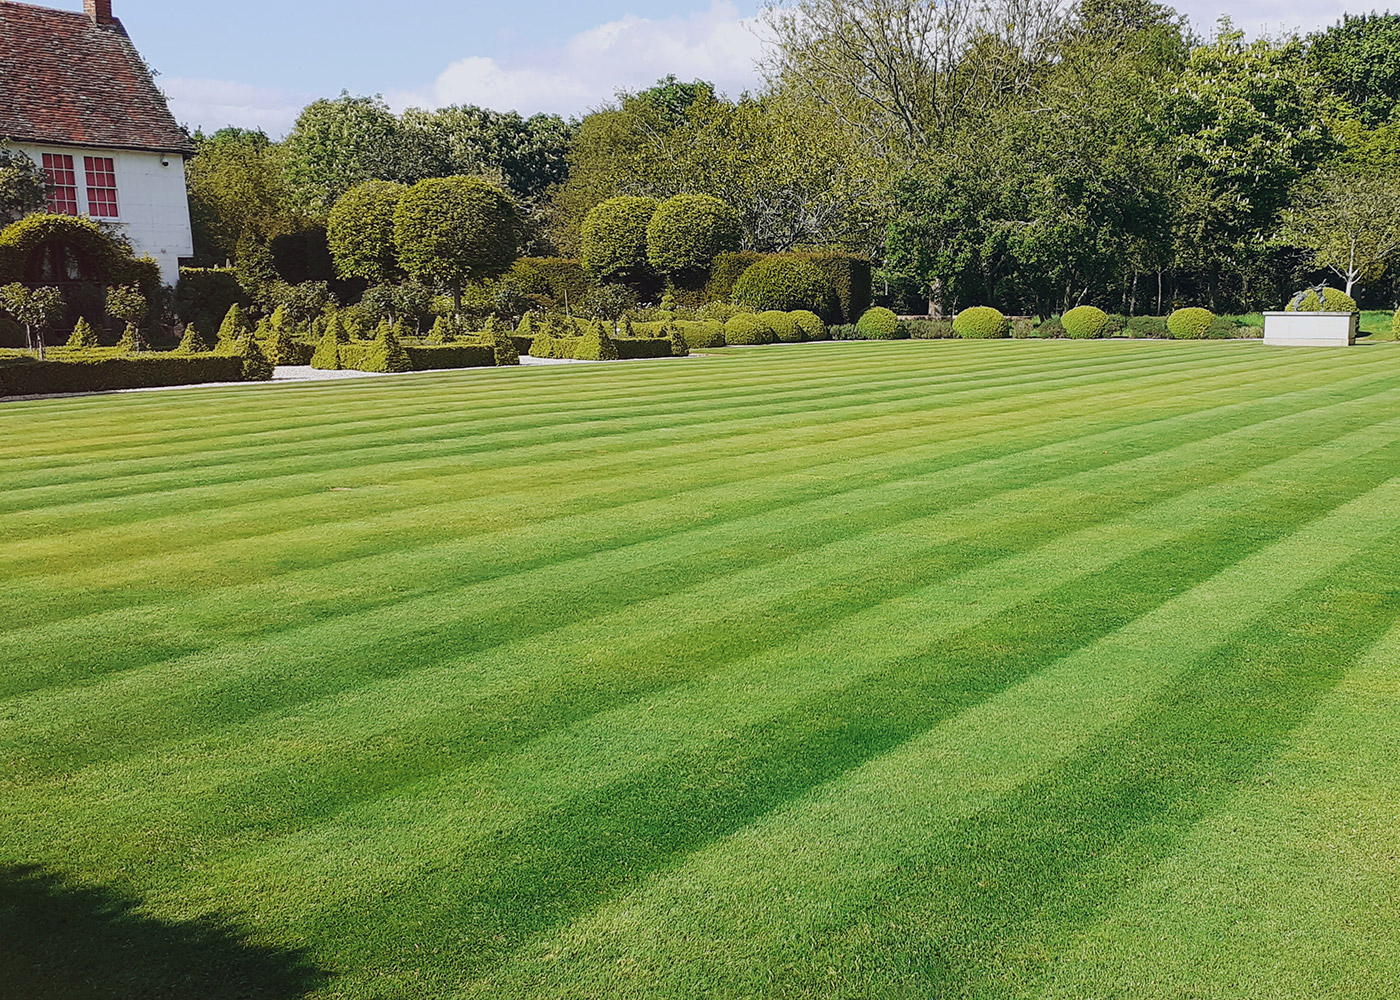 Lawn with stripes